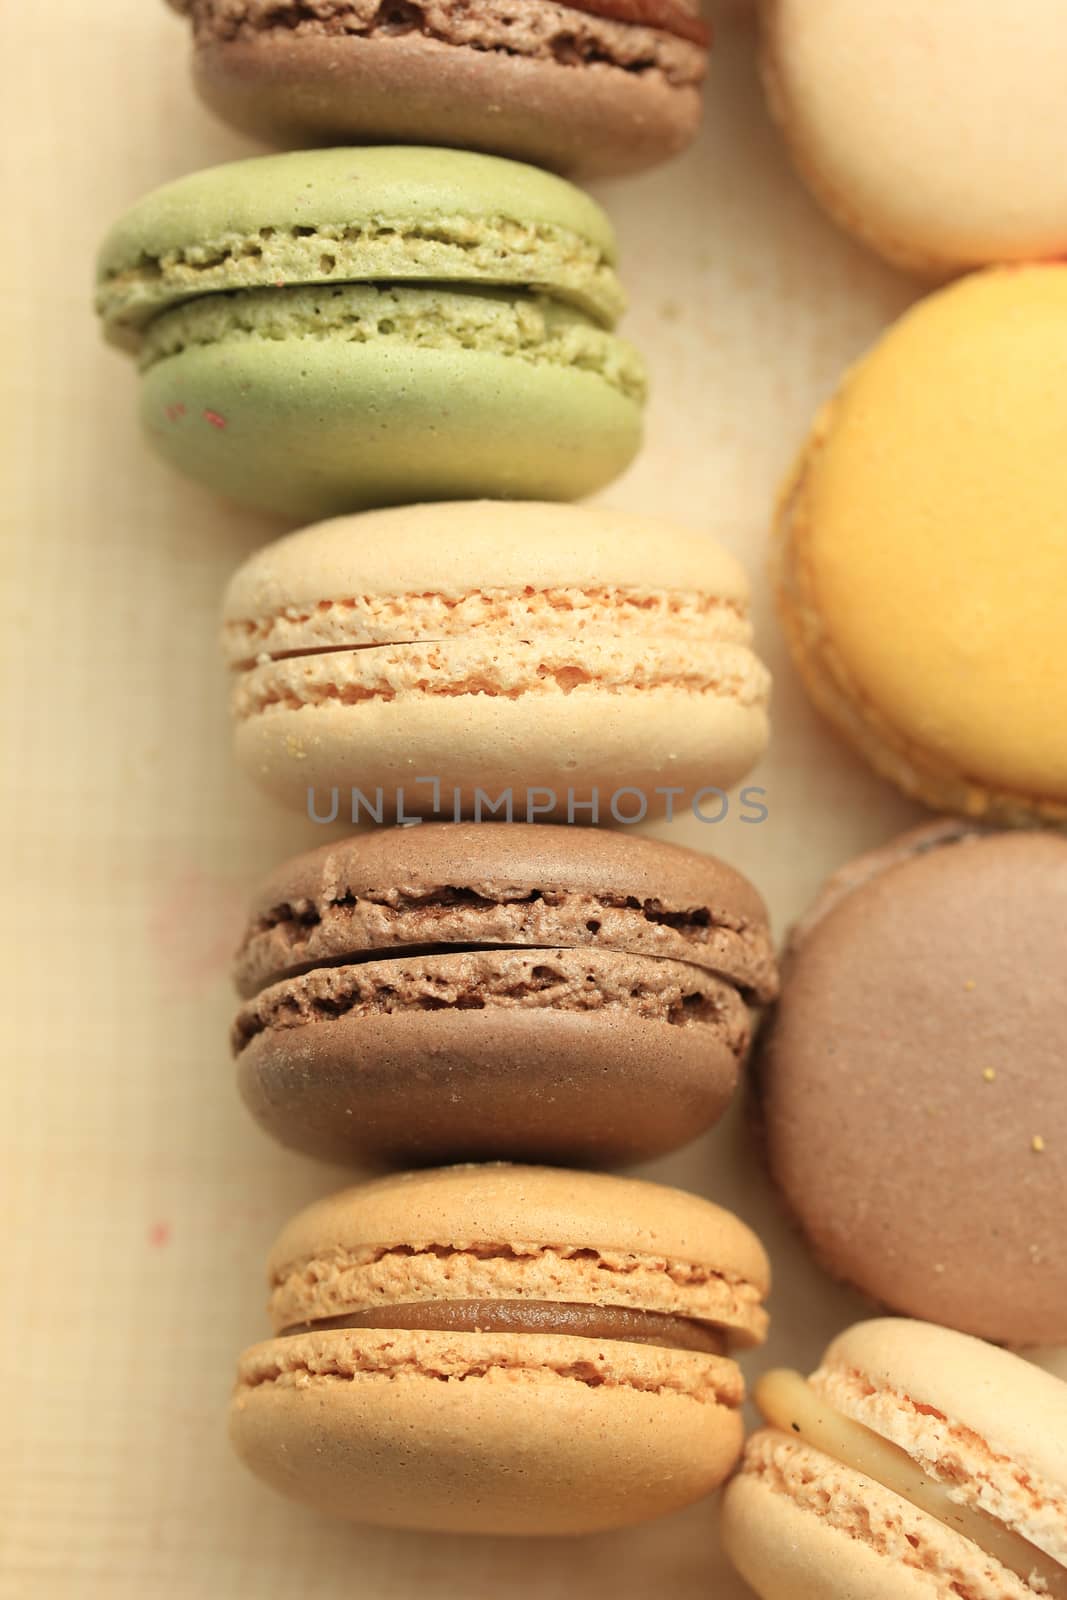 Macarons in different colors and flavors on a wooden cutboard